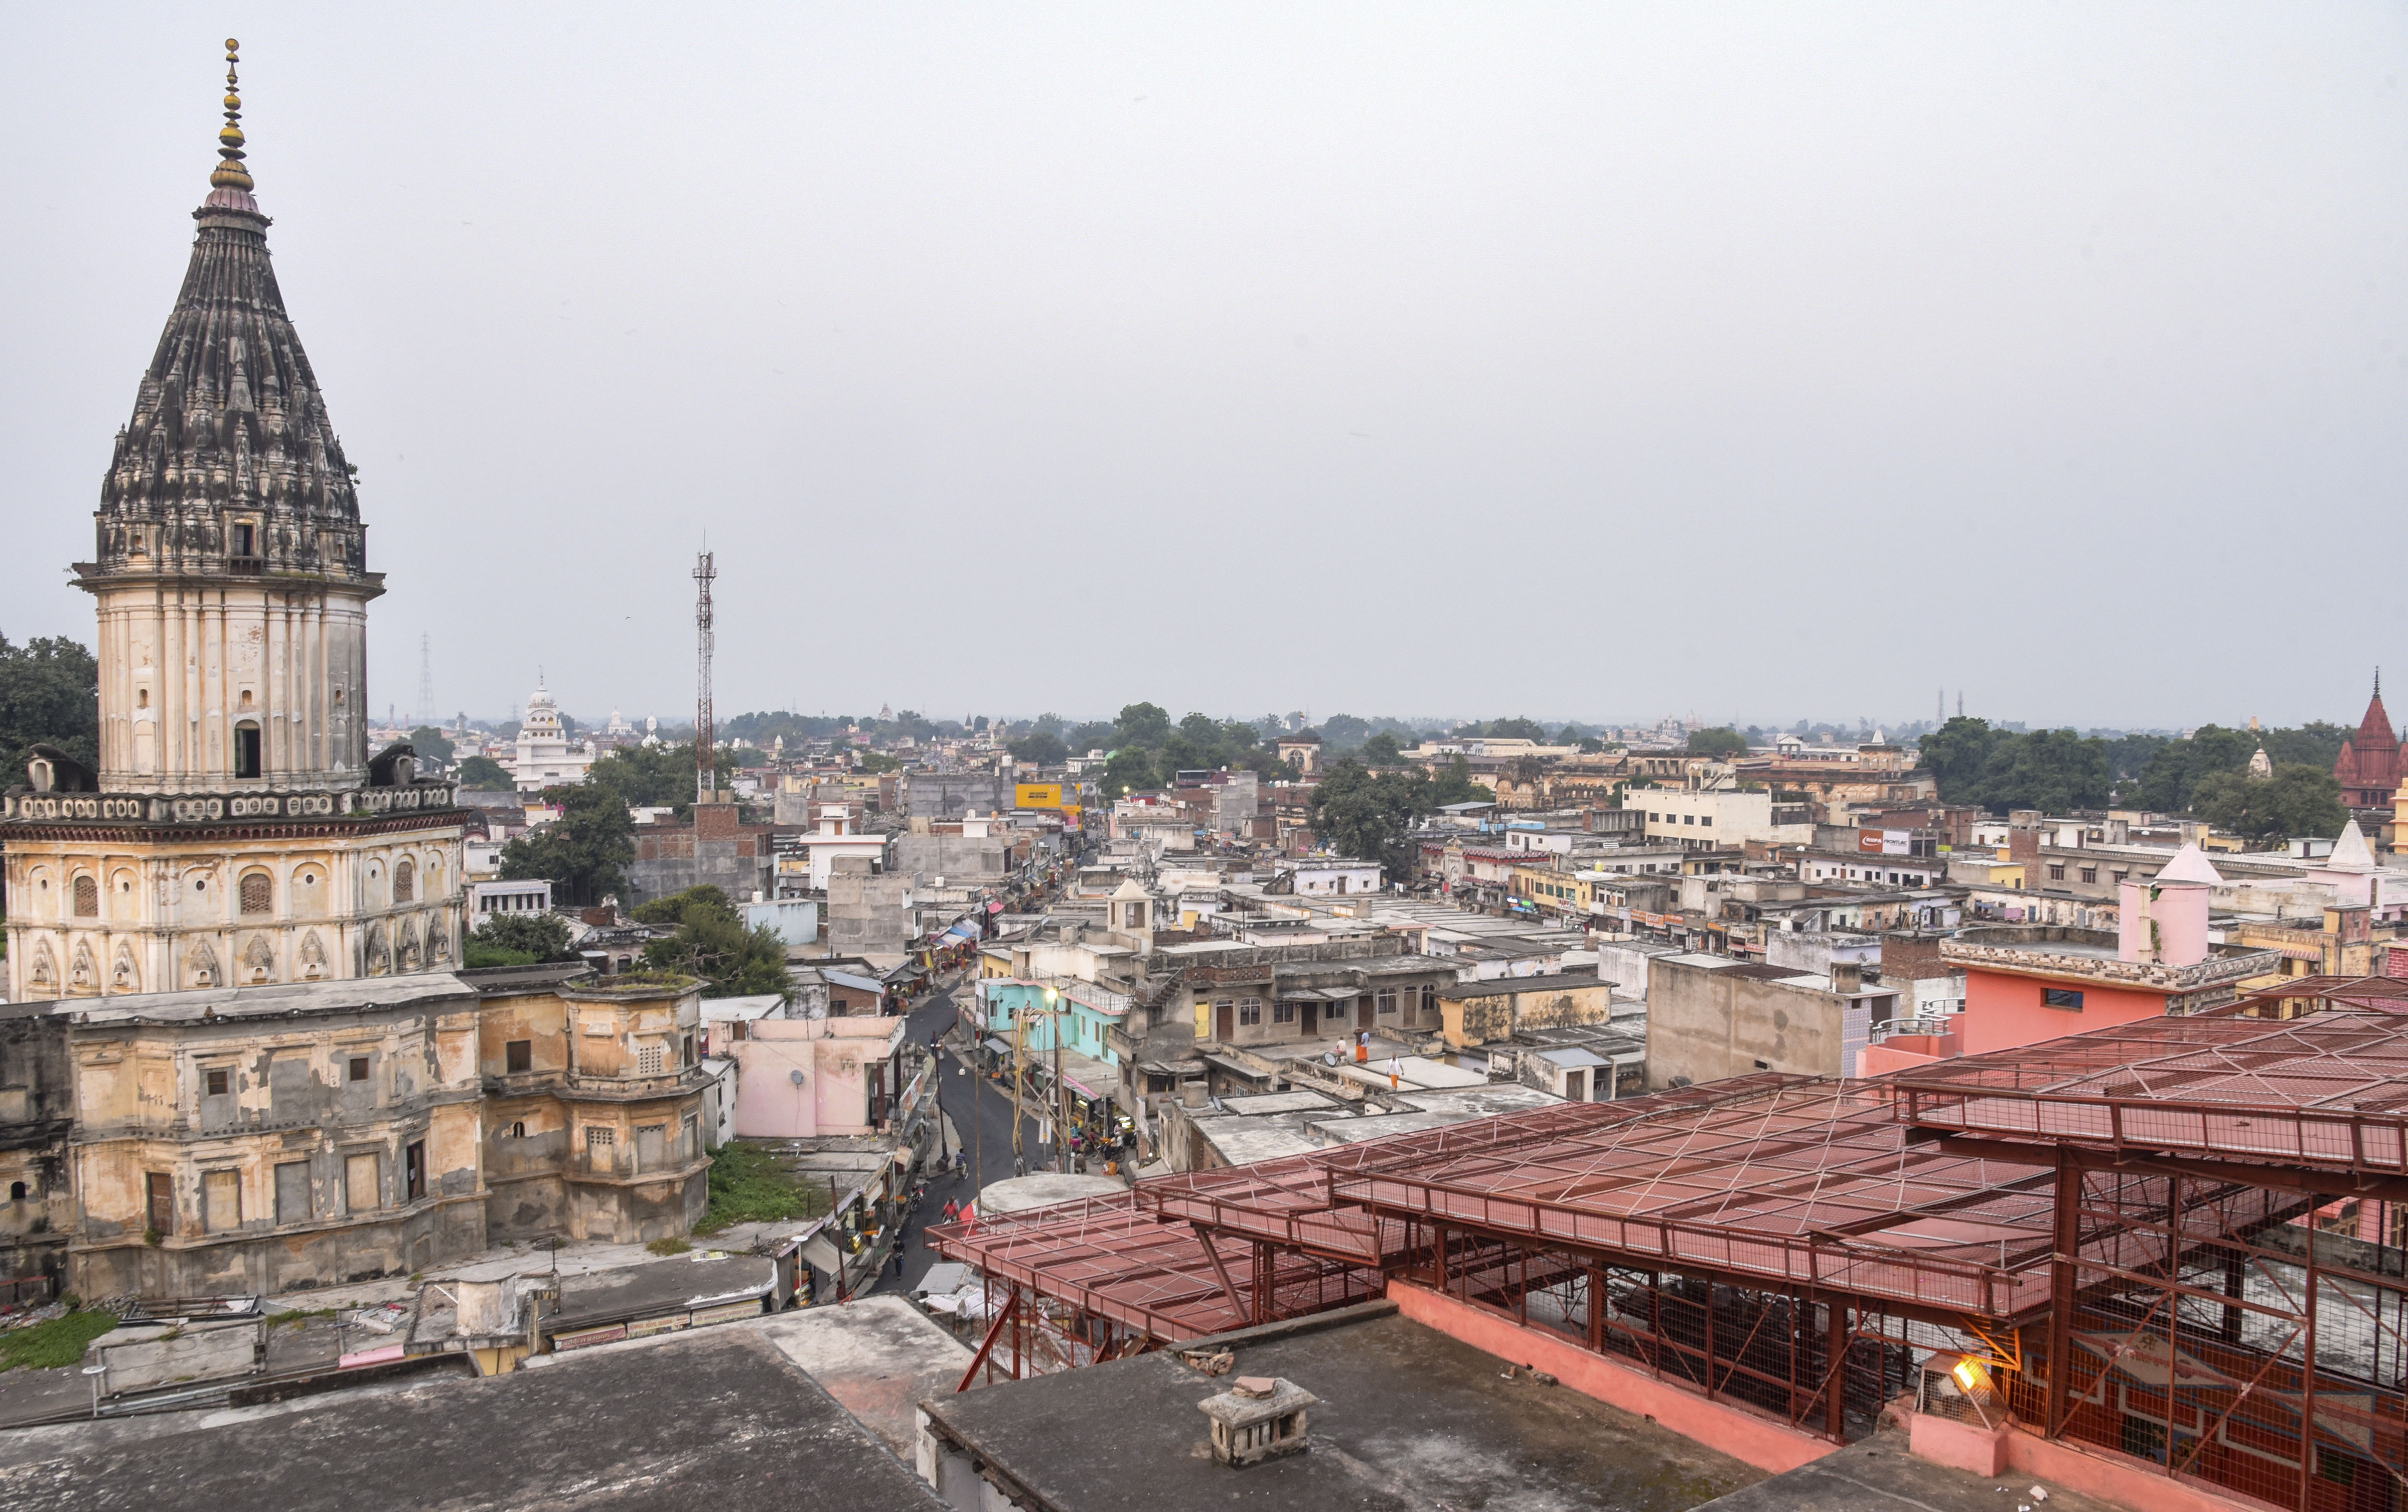 A view of Ayodhya as seen from the roof of the famous Hanumangarhi temple on Thursday evening, October 17, 2019.